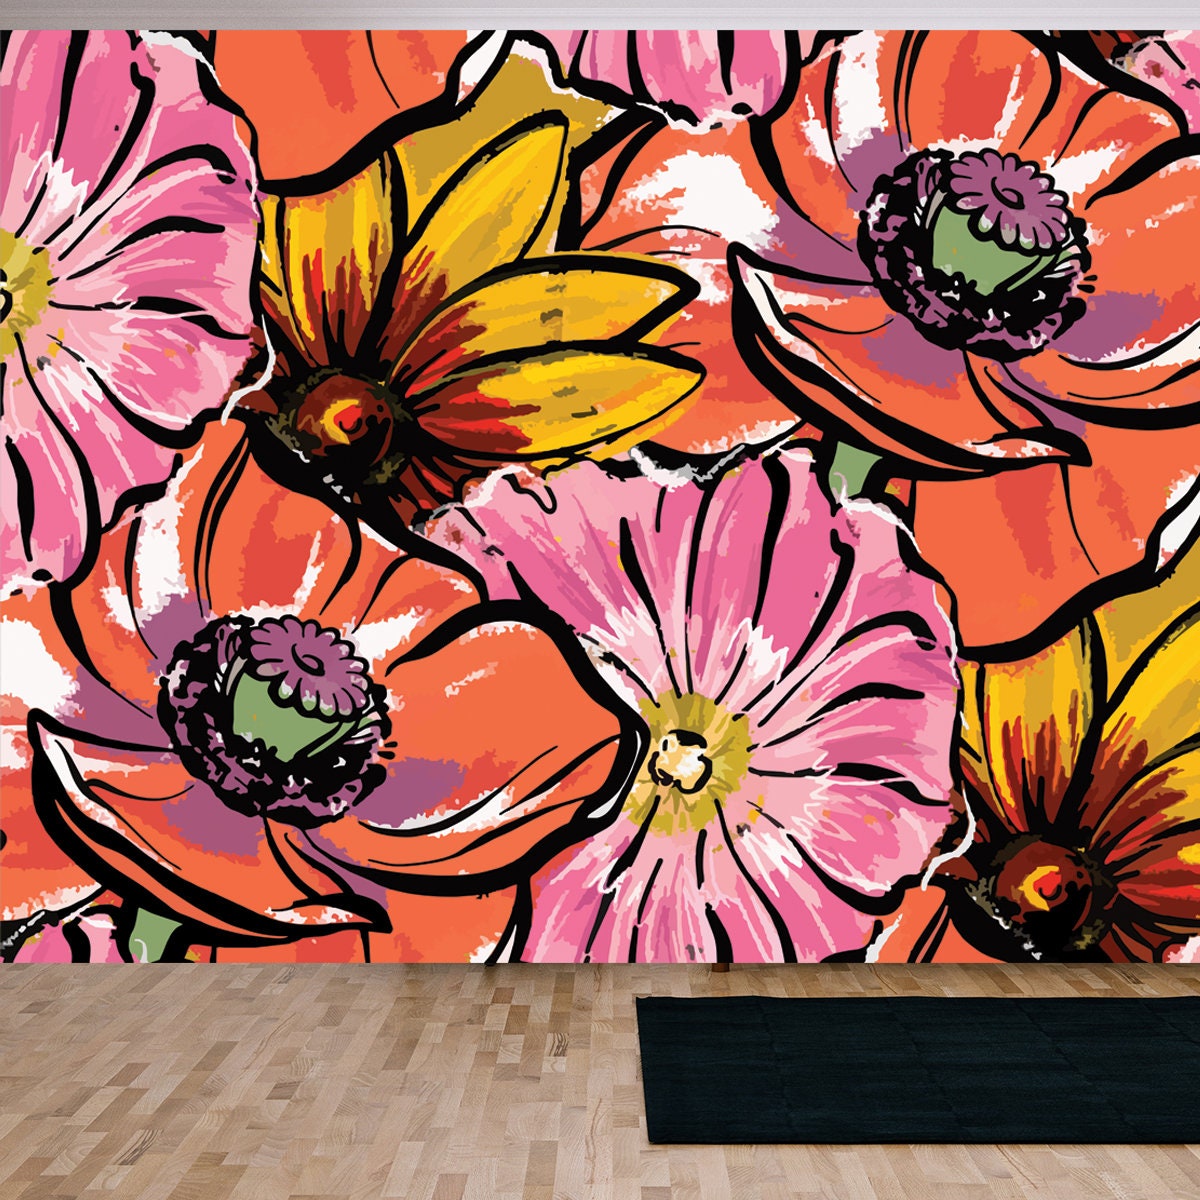 Red Large Flowers. Poppies, Rudbeckia and Mallow Wallpaper Living Room Mural